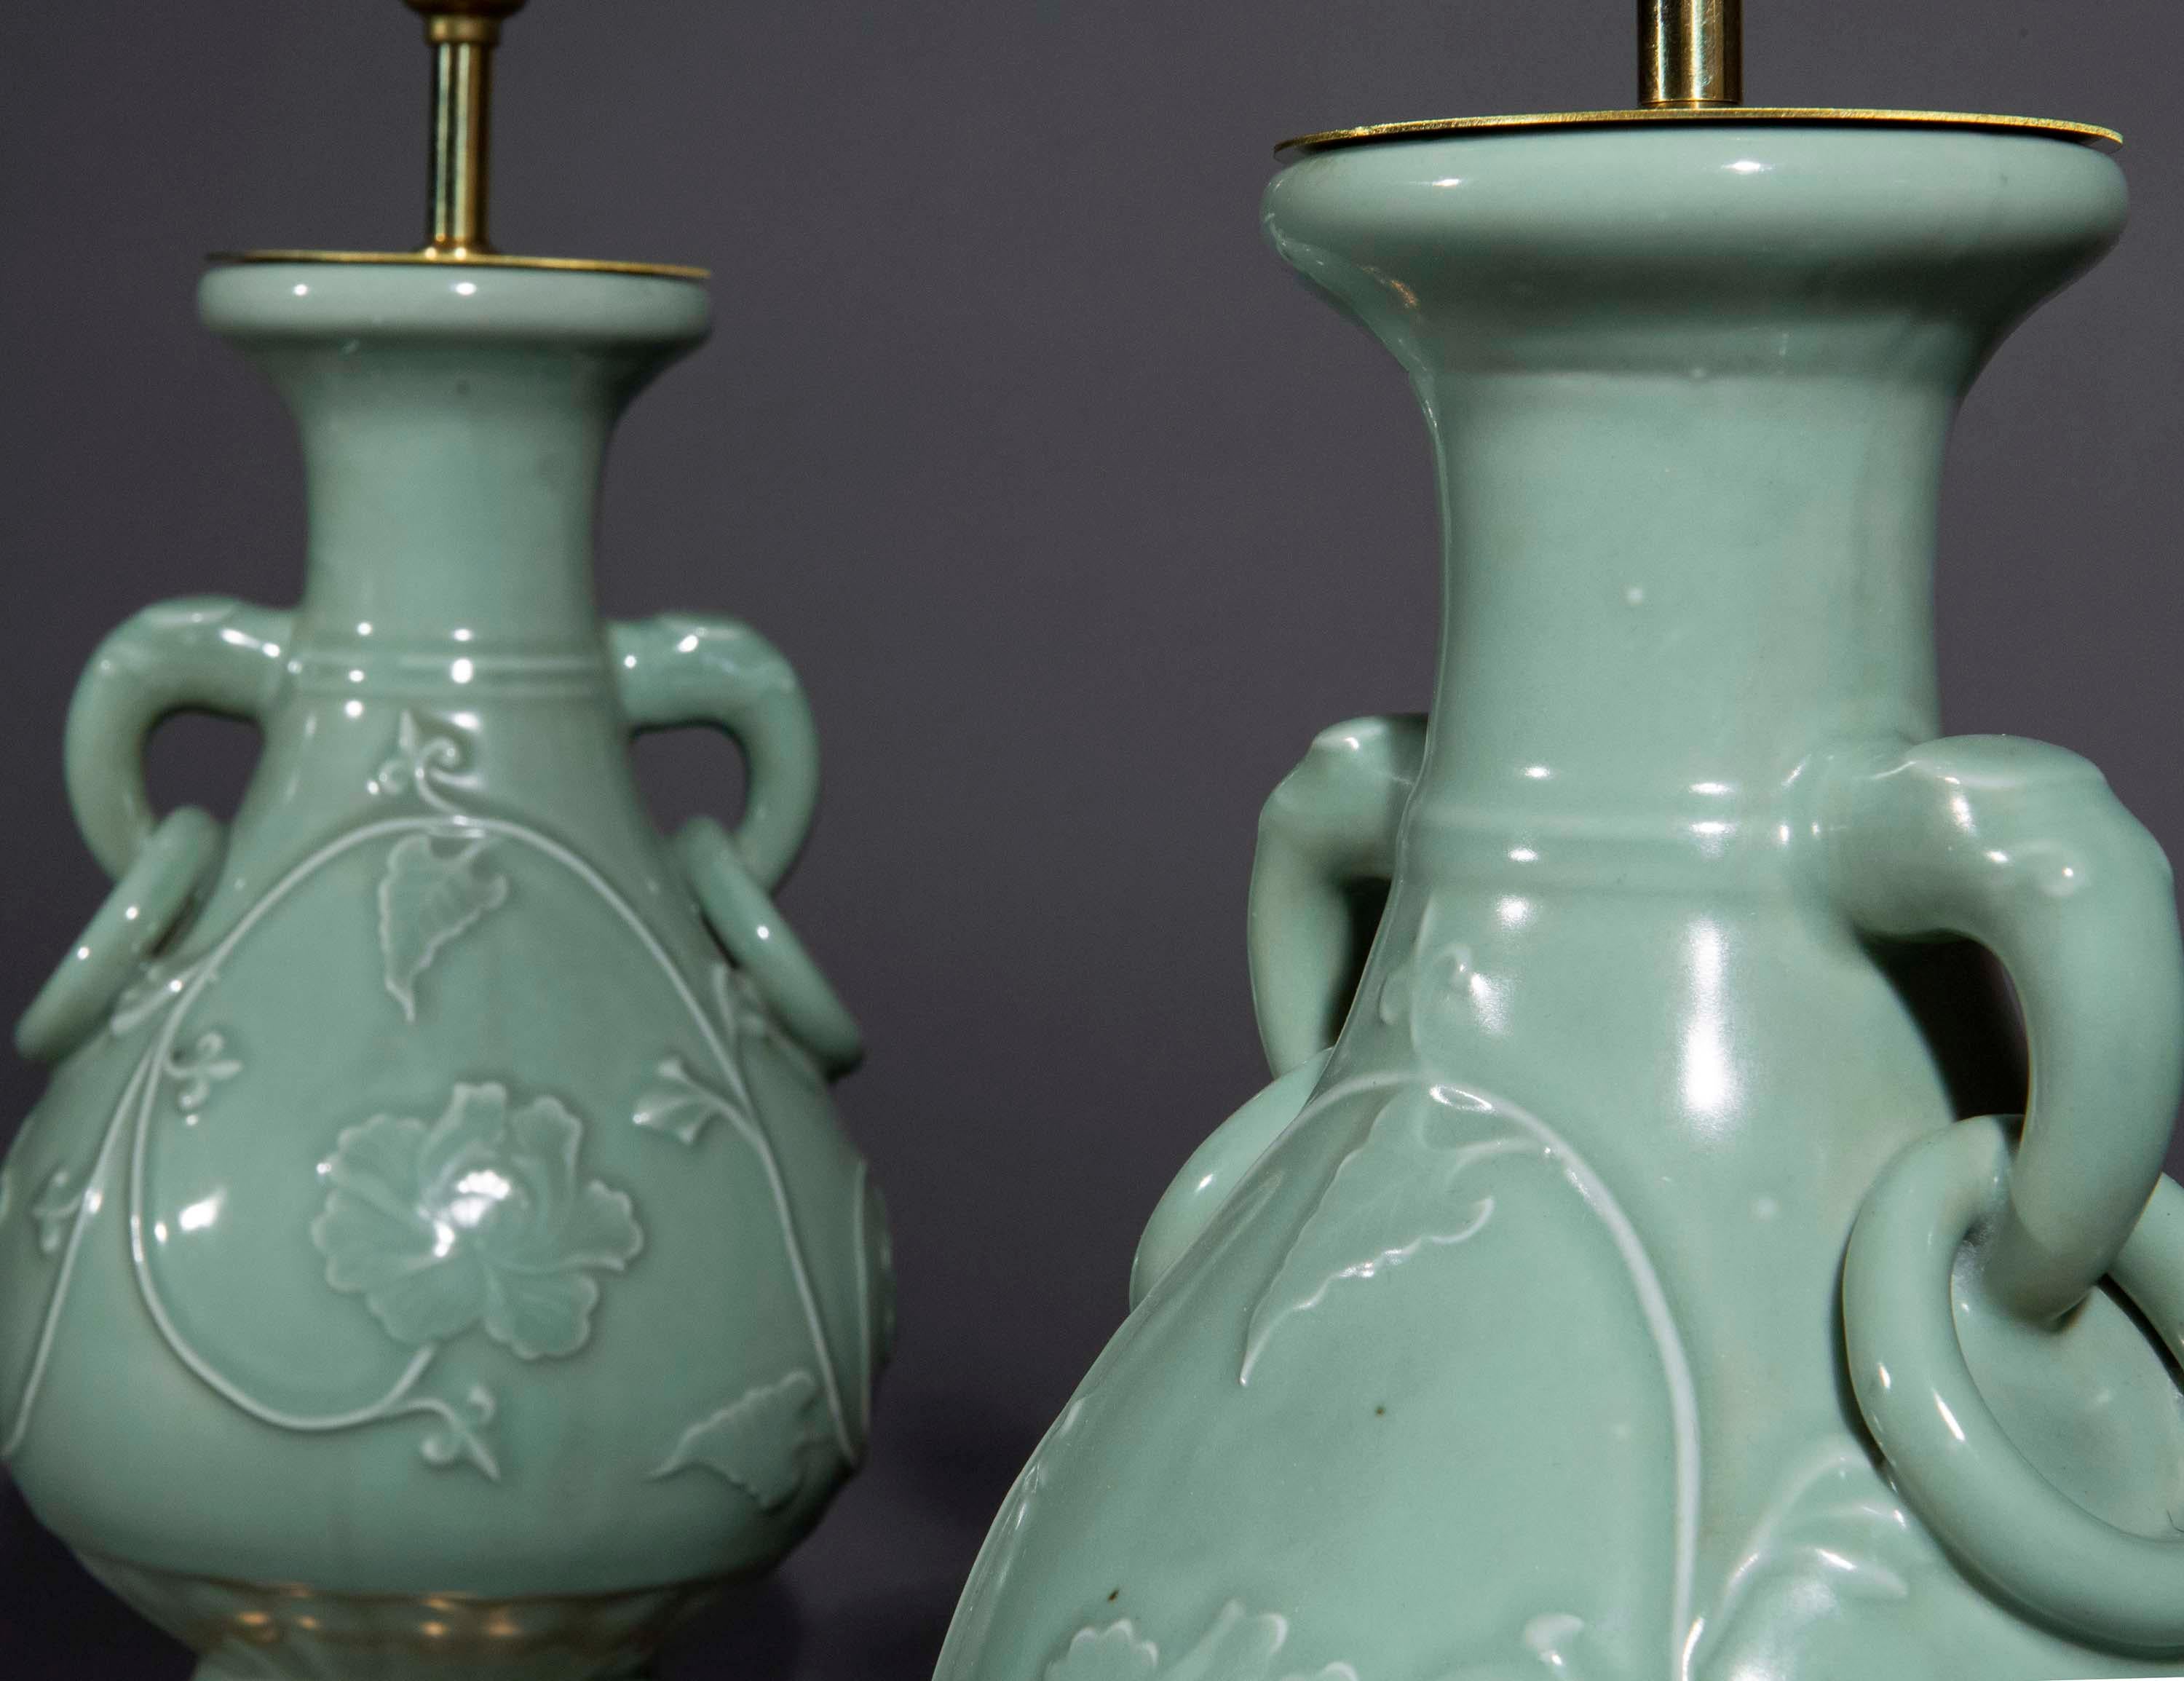 A pair of Chinese Longquan ware vases in light-green celadon glaze, of the 12th–14th century Song or Yuan dynasty style. Fitted as lamps on gilt turned circular bases.
Vases China, early to mid-20th century.

The vases have the